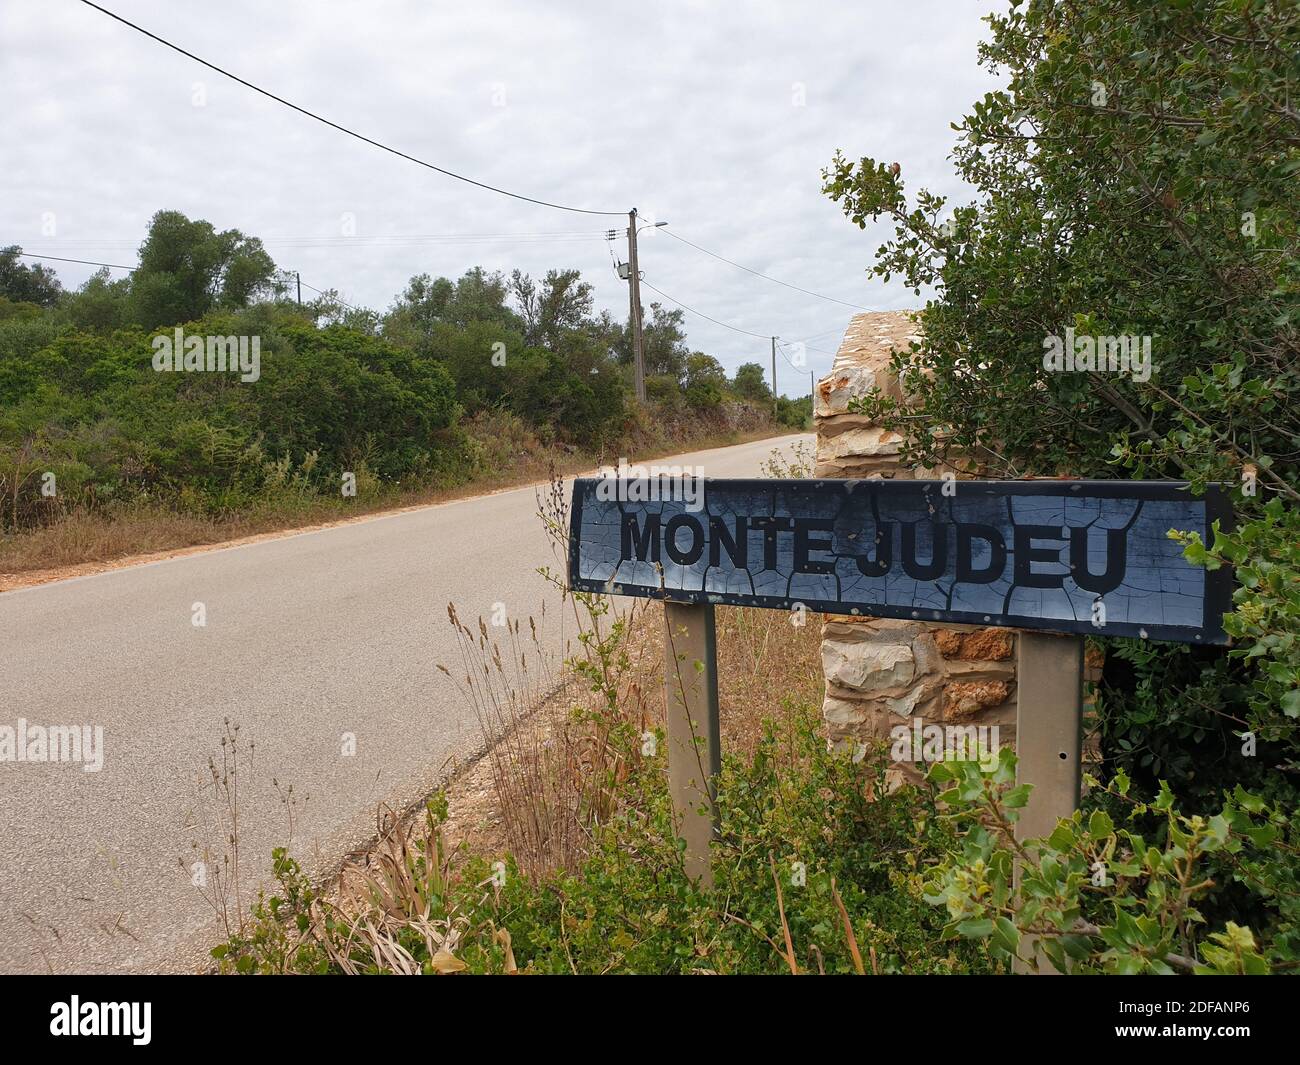 Entrance to the Monte Judeu’s village (suspect’s house), Portugal, on June 7, 2020, where the three-year-old British girl Madeleine McCann was on holidays when she disappeared in 2007. Portuguese justice said to be questioning witnesses as part of the investigation into the 2007 disappearance of the British girl Madeleine McCann, whose case re-emerged on May 3, 2020 with the identification of a new German suspect. Photo by ABACAPRESS.COM Stock Photo